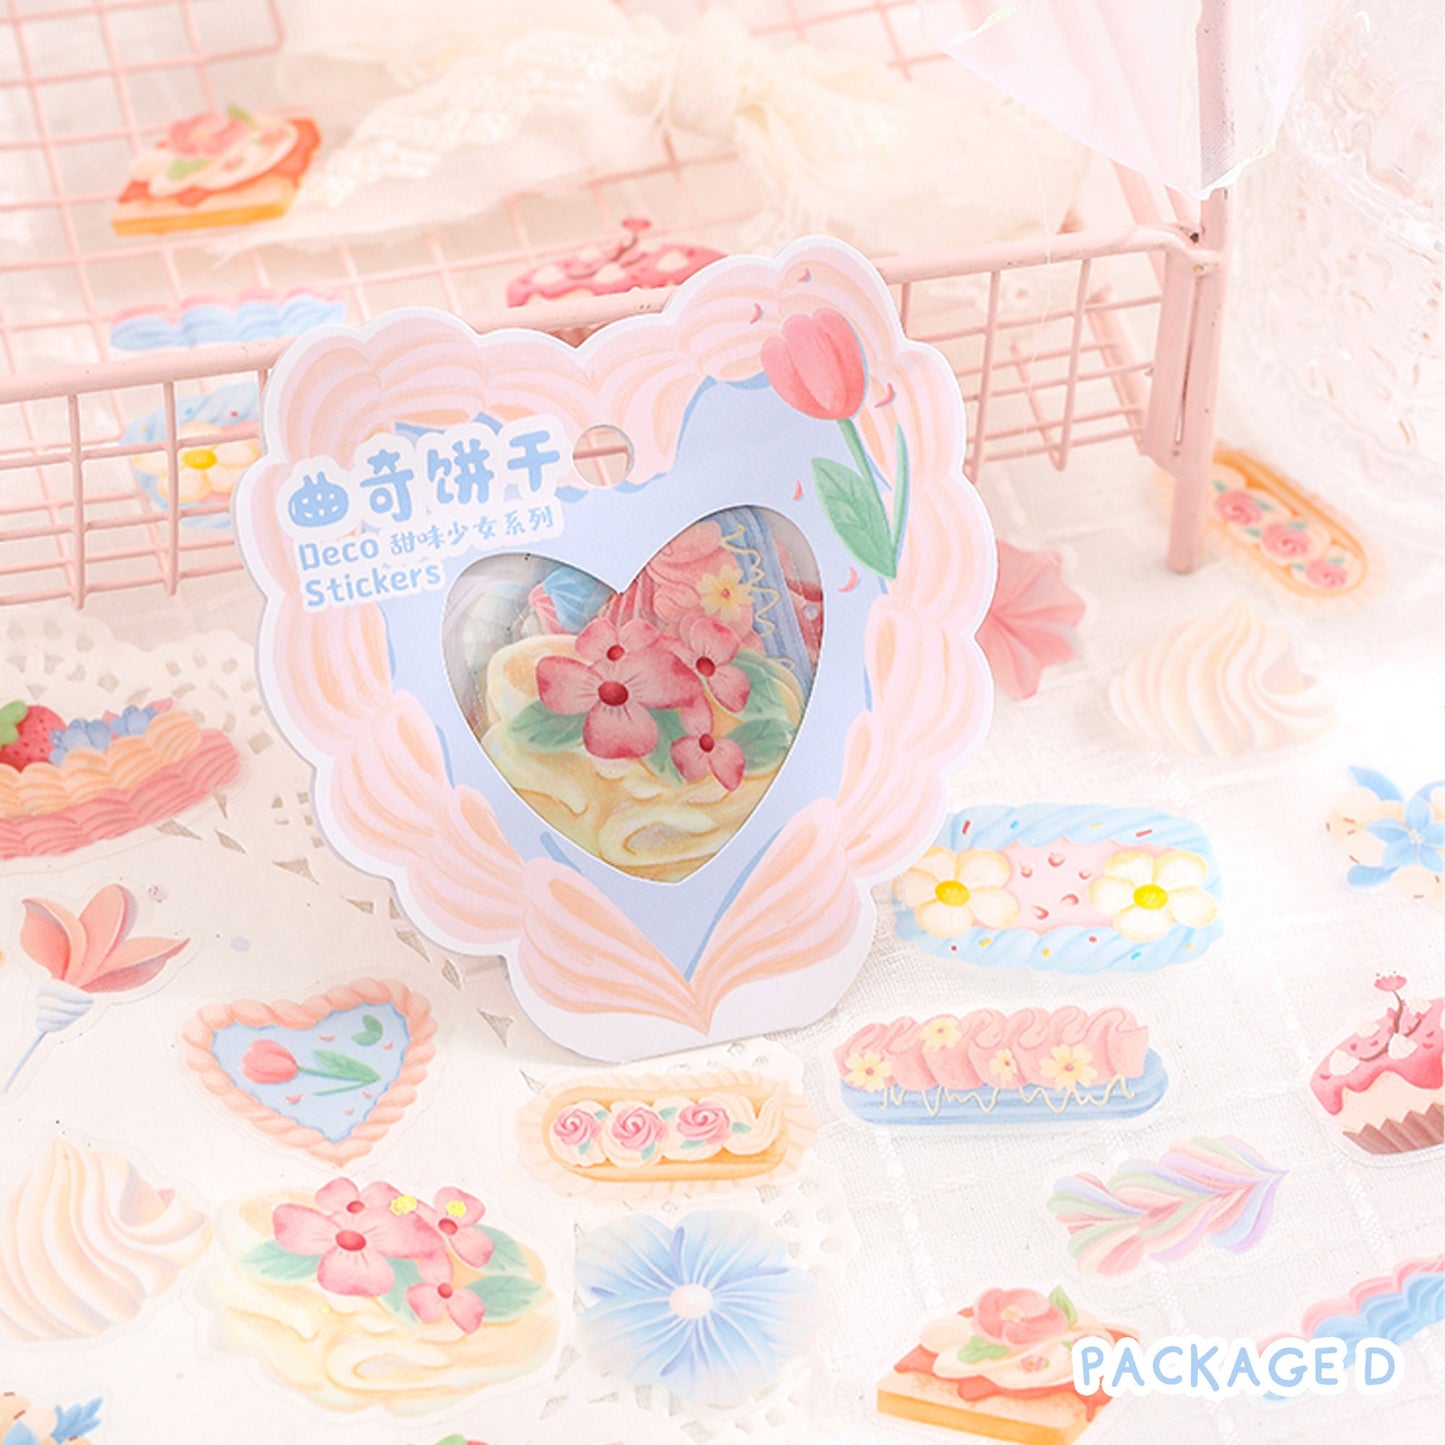 Kawaii Pastry Stickers - Cute Stickers - Treat Stickers - Kawaii Stickers - Frosting Stickers - Journal Flakes Stickers, Clear Stickers B3C